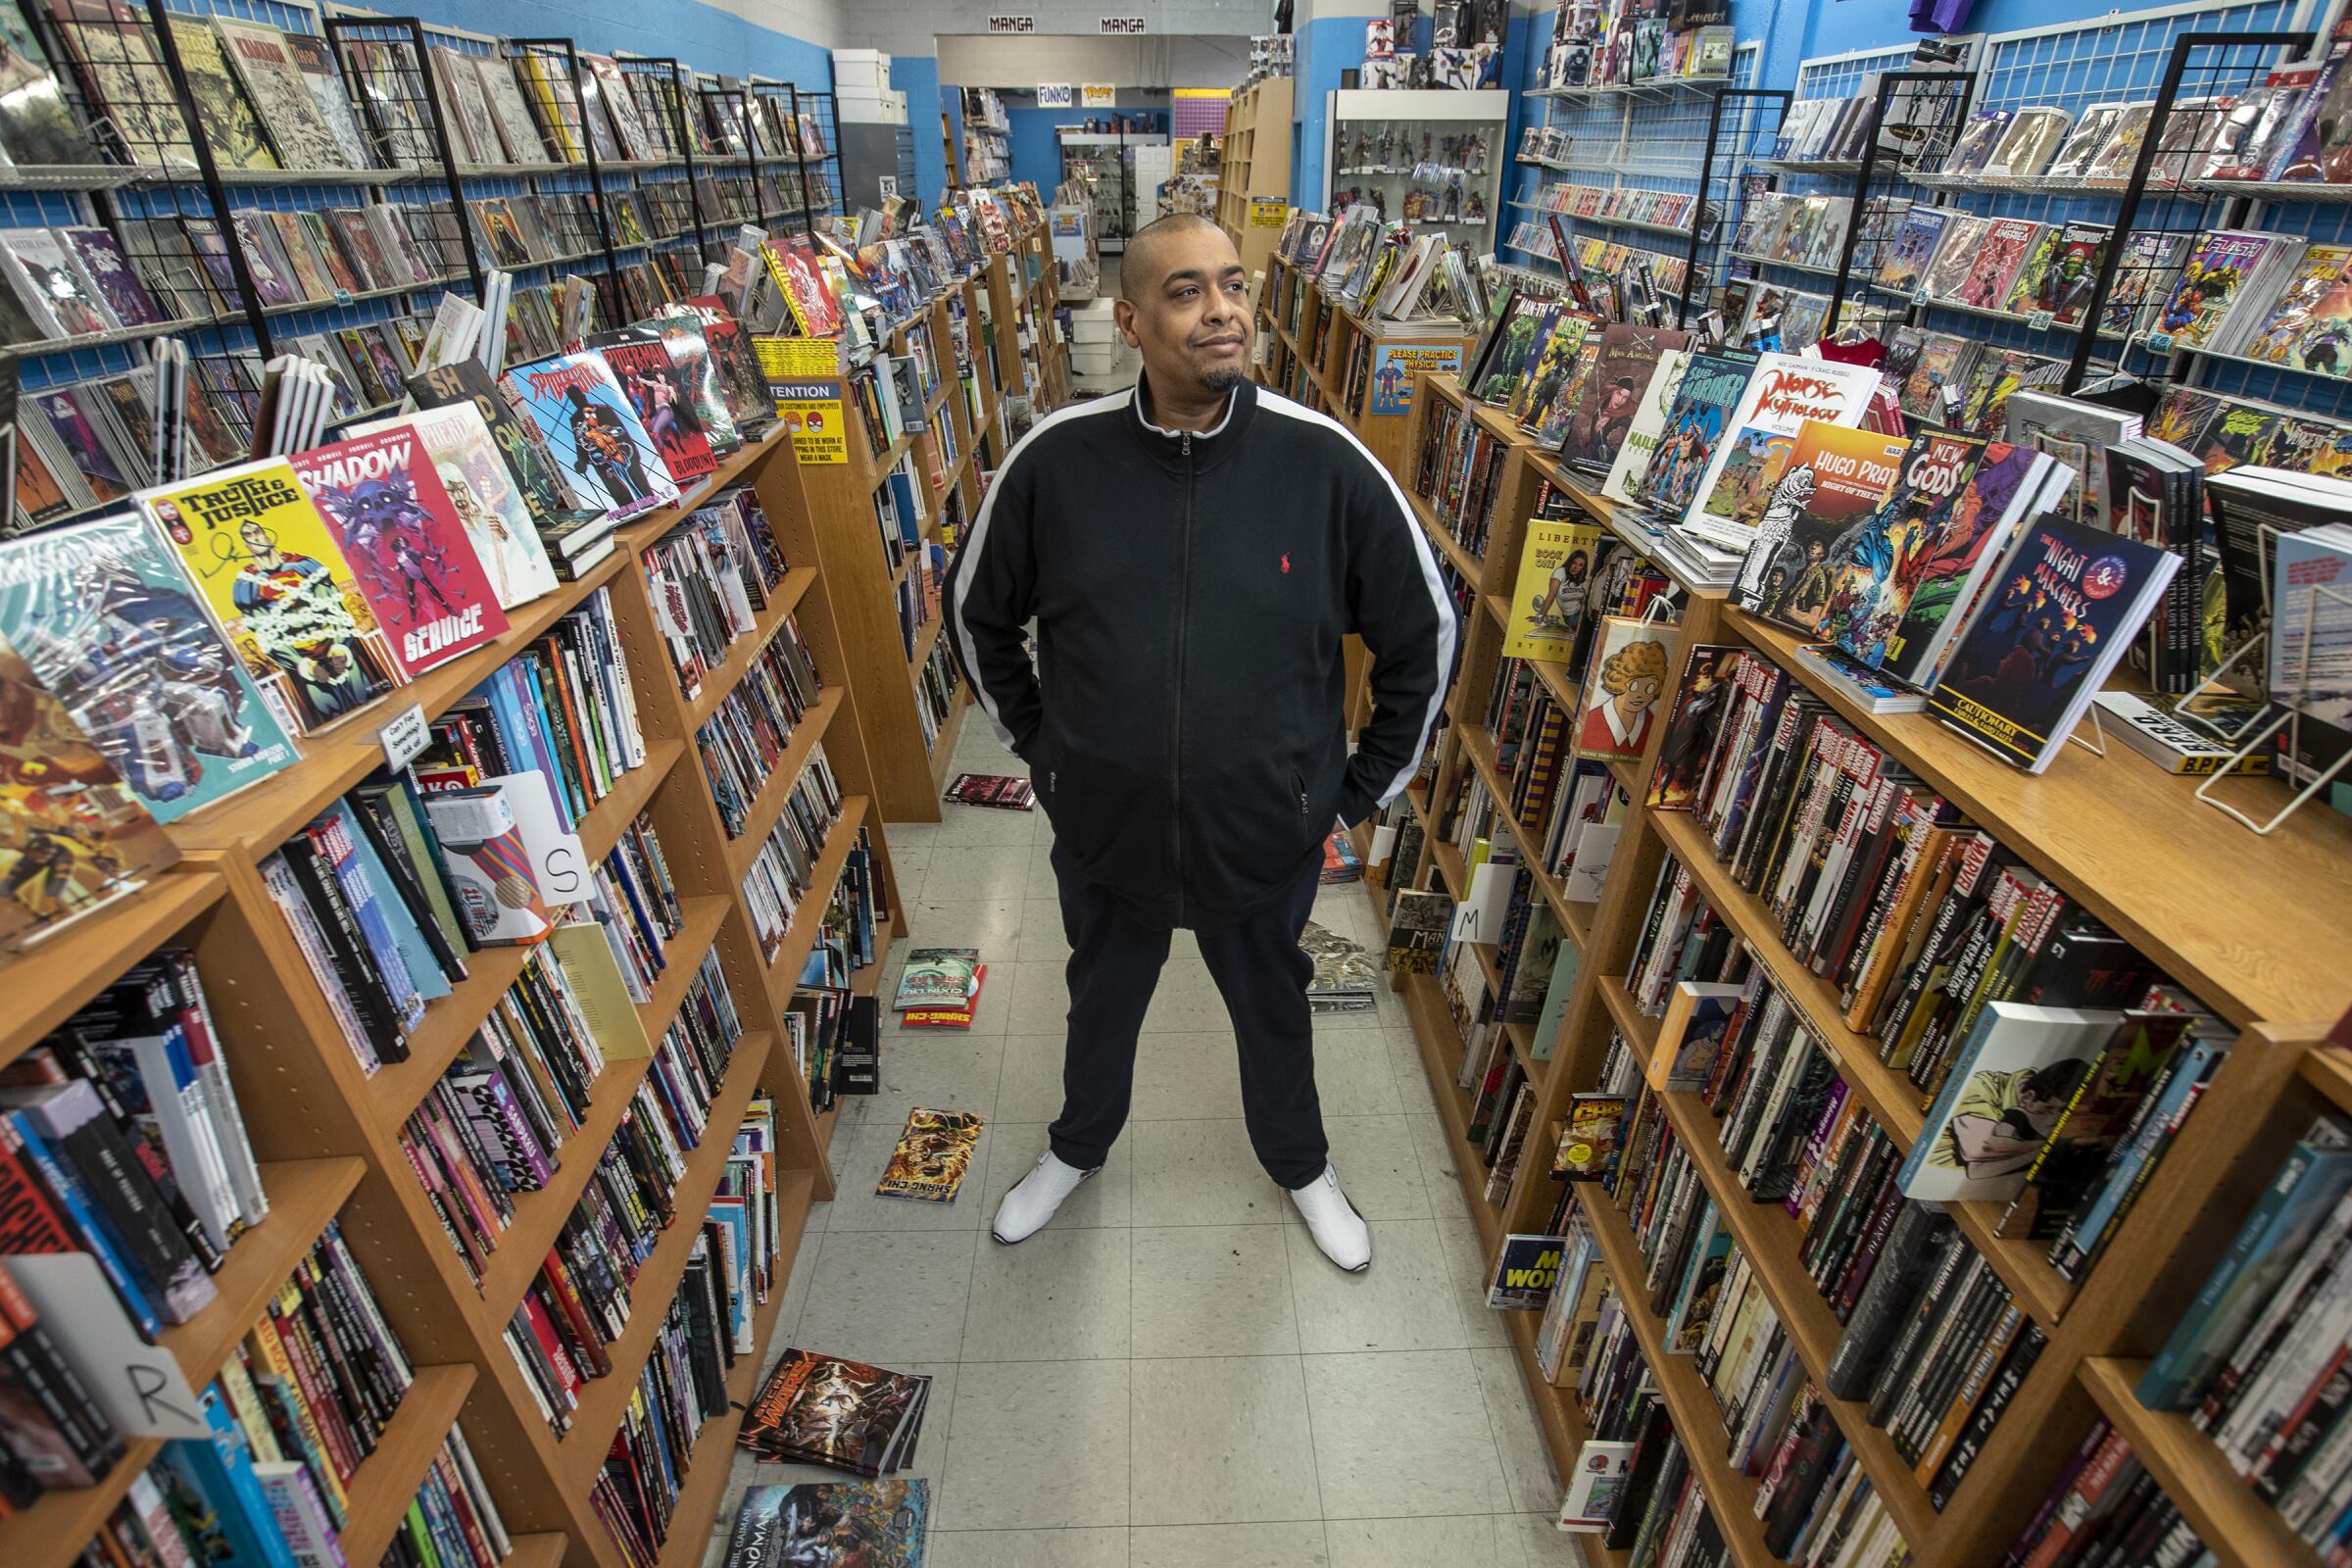 A man between shelves filled with graphic novels at a store.